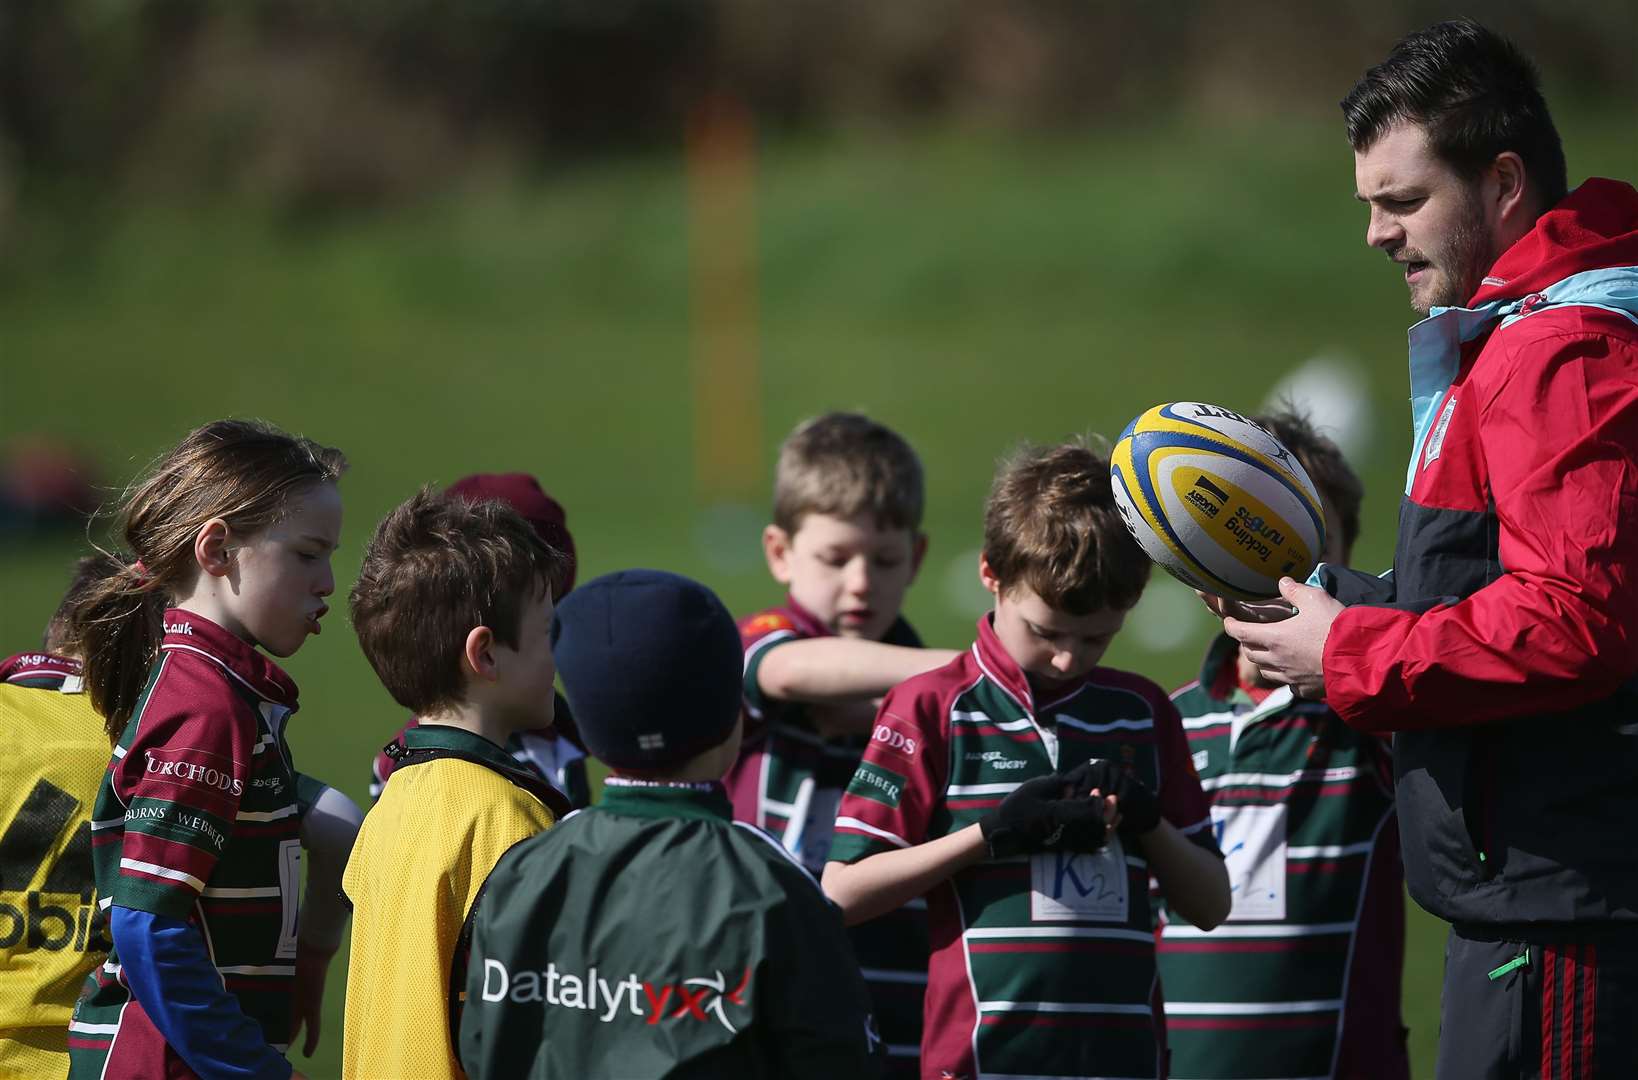 Harlequins Academy were offering top-level training sessions